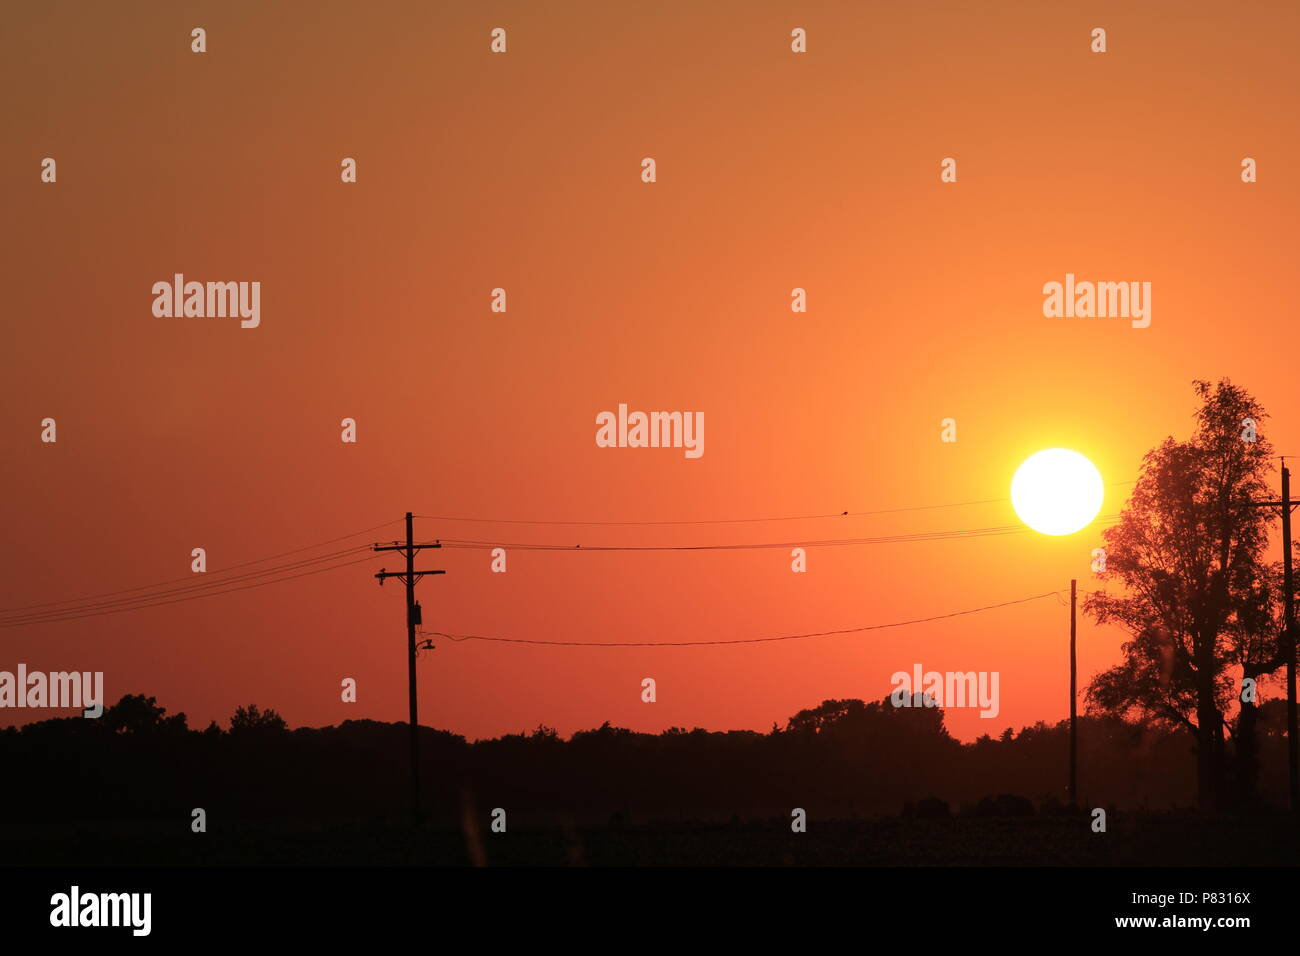 Red and Yellow Sunset with Power Lines and poles with tree's that's bright and colorful. Stock Photo